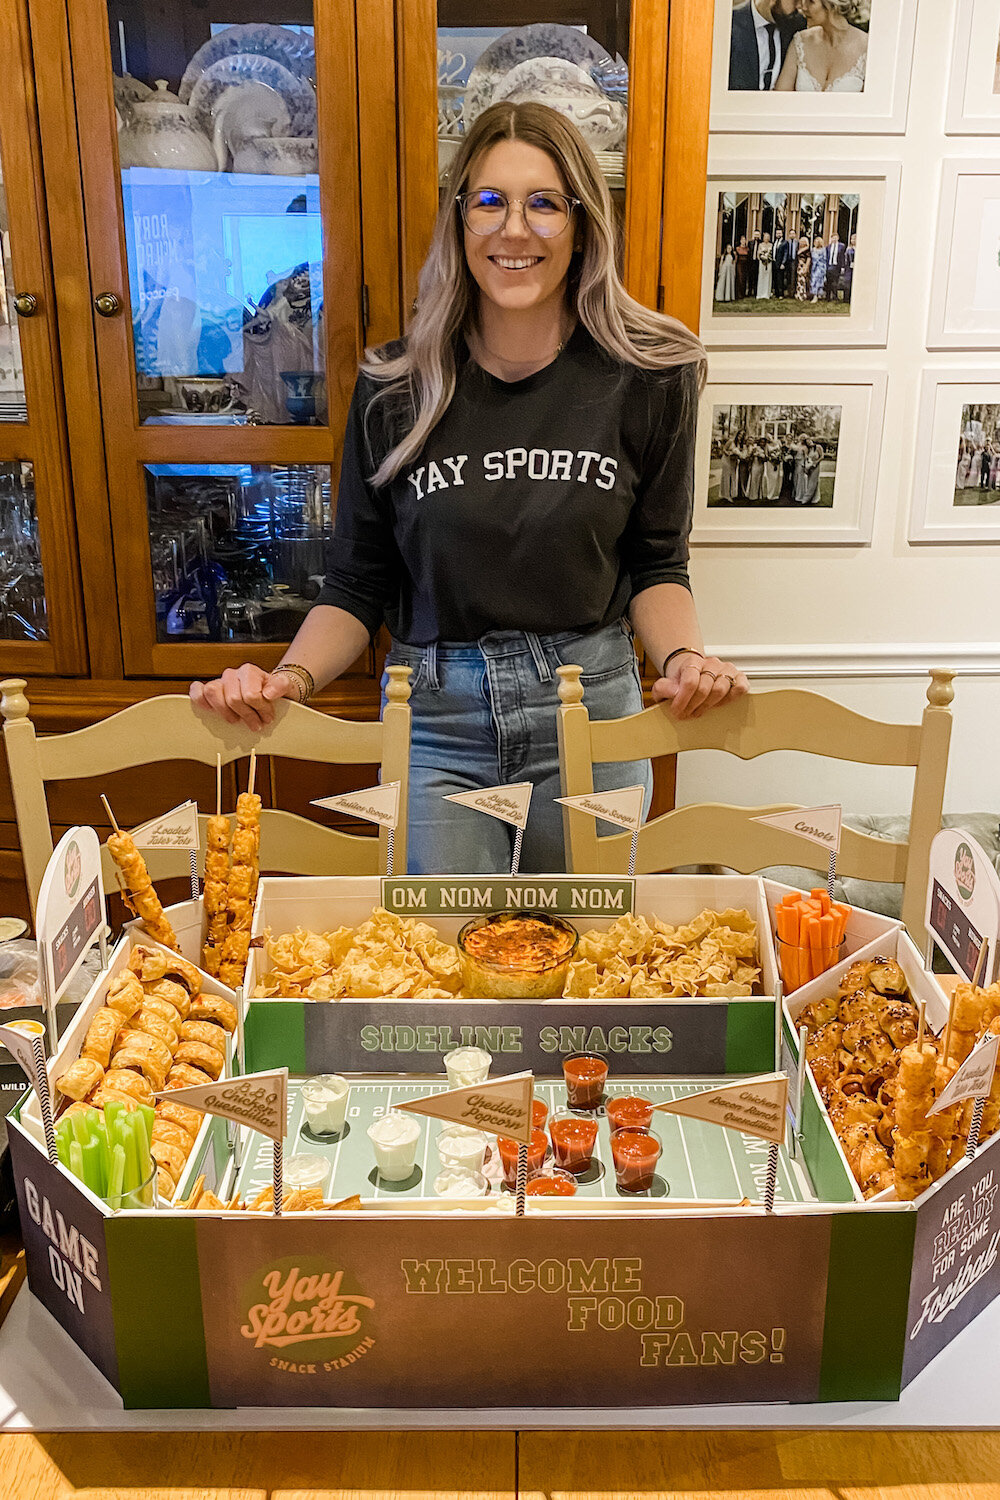 How to Make an Epic Football Snack Stadium — Chelsea Made It